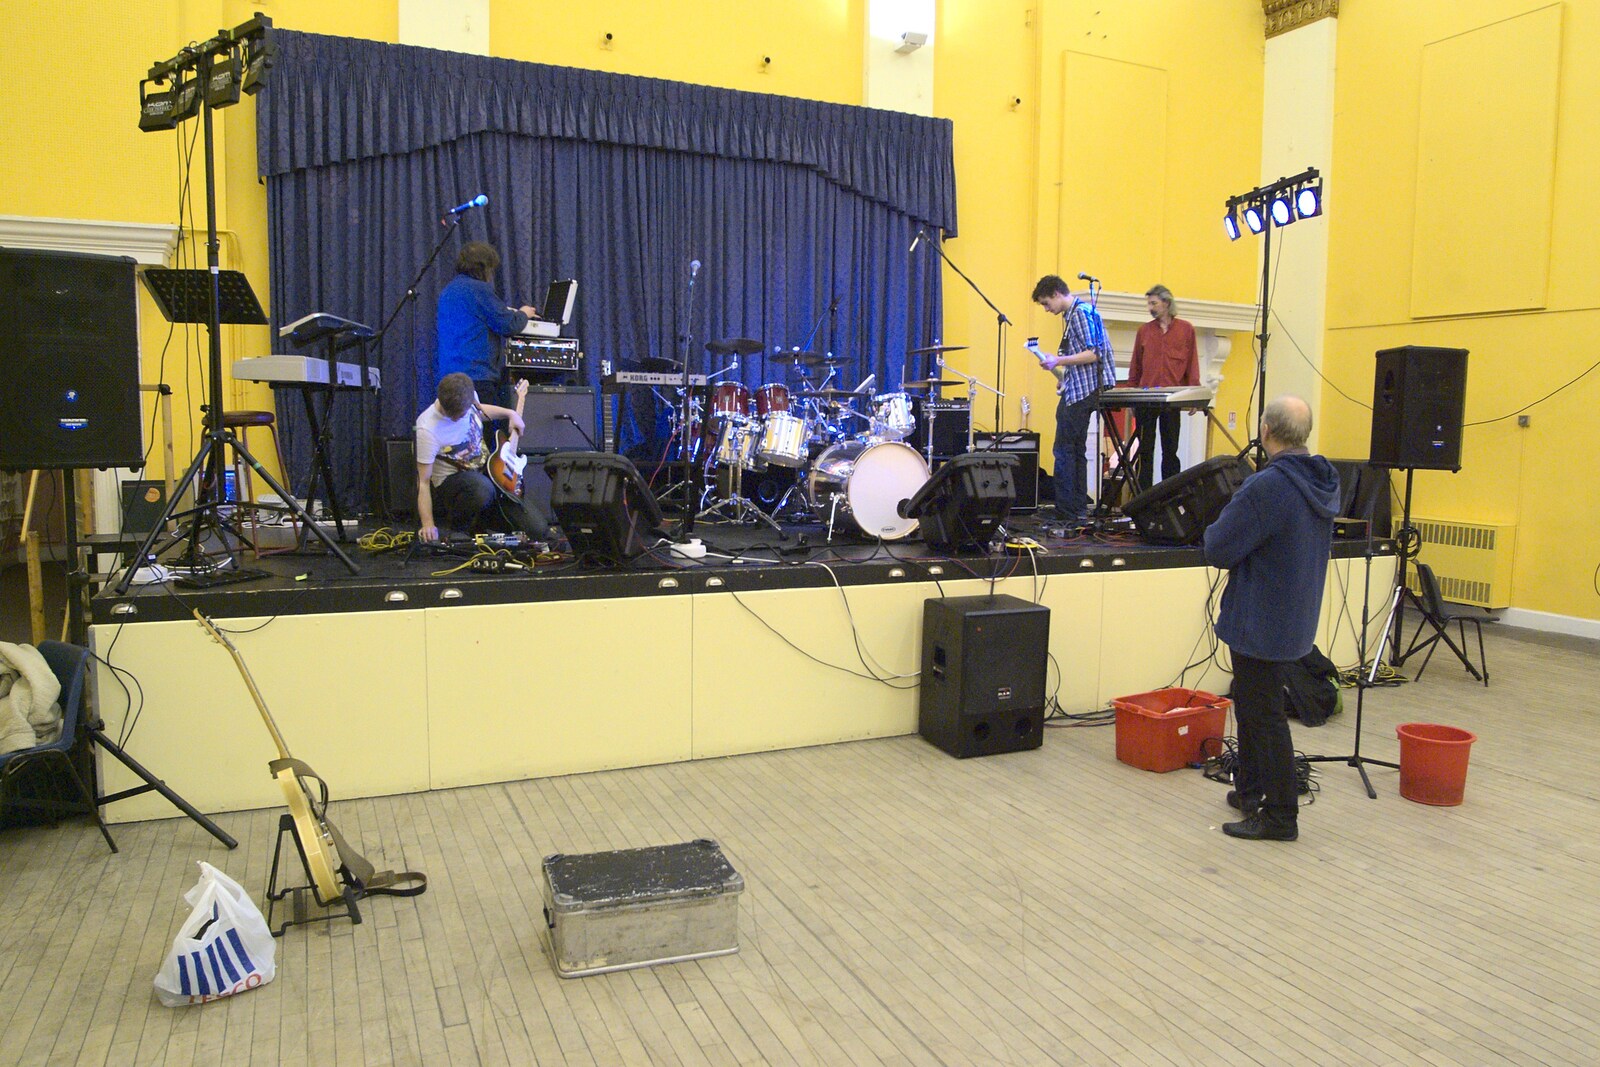 Sound checks on stage from The BBs with Ed Sheeran, Fred's Haircut, and East Lane, Diss, Ipswich and Bawdsey  - 21st February 2010